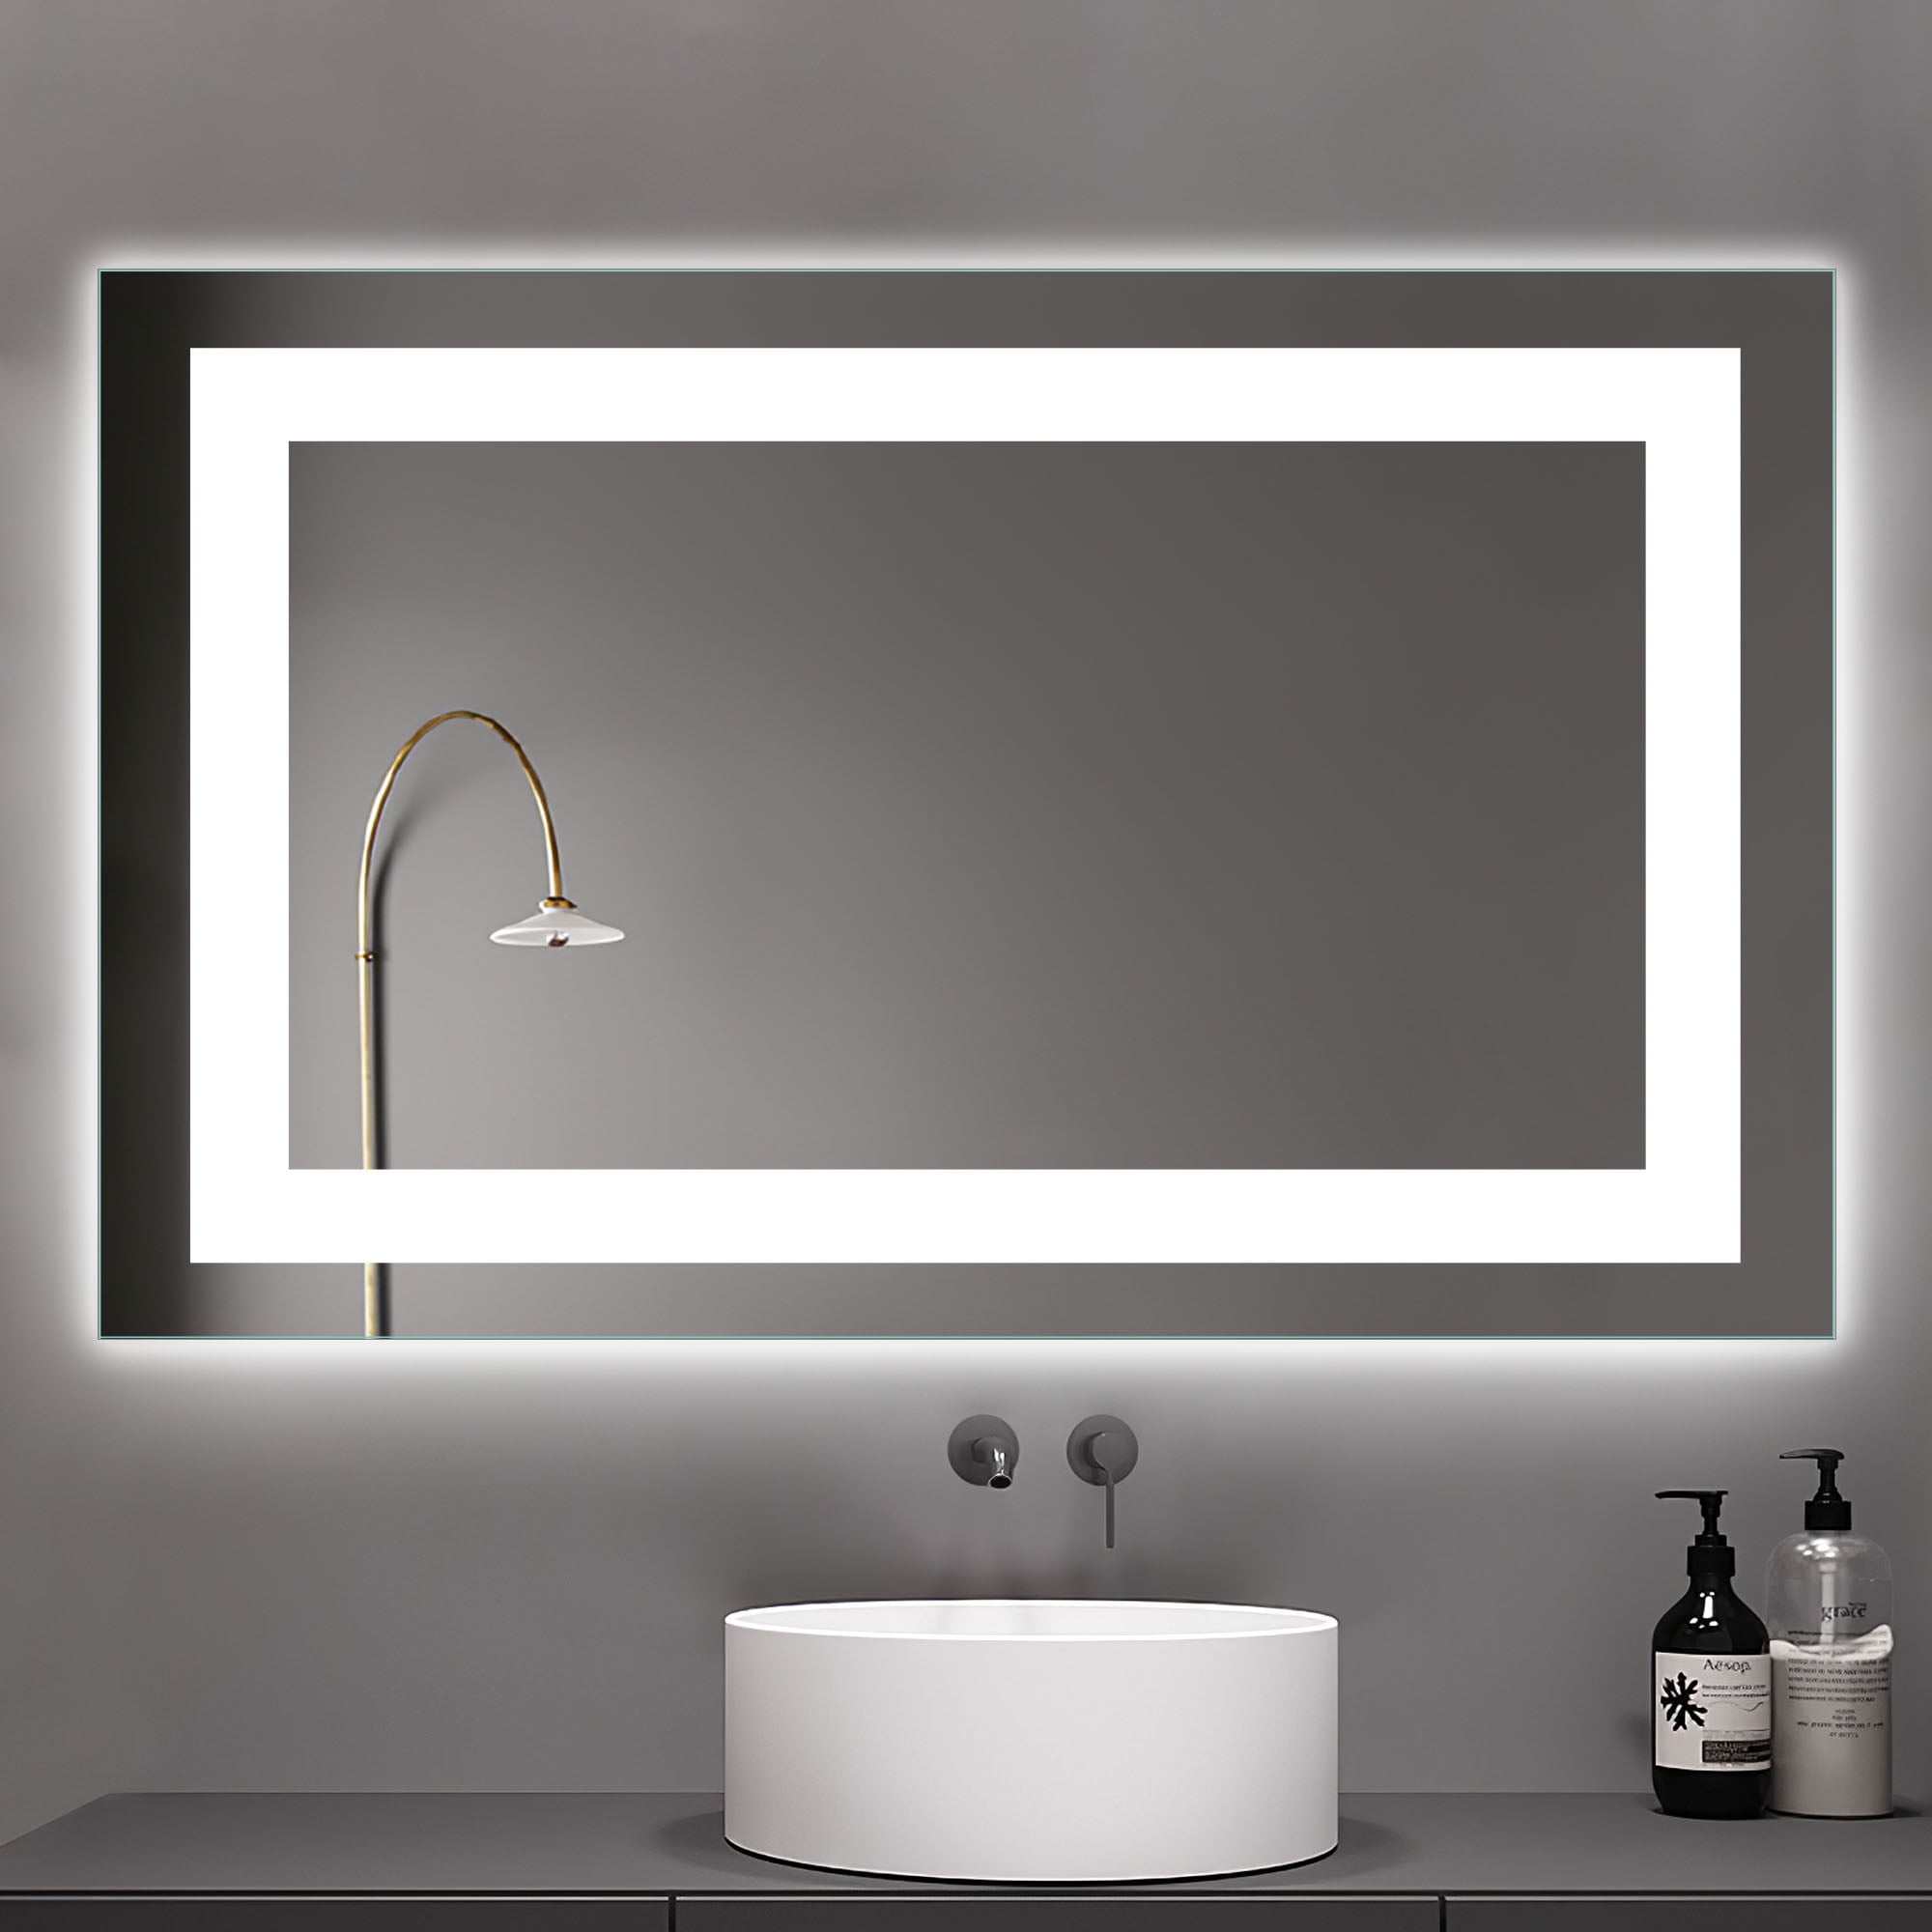 Details about   LED Wall Sconce Lamp Fixture Bathroom Dresser Mirror Front Light Acrylic Bedroom 